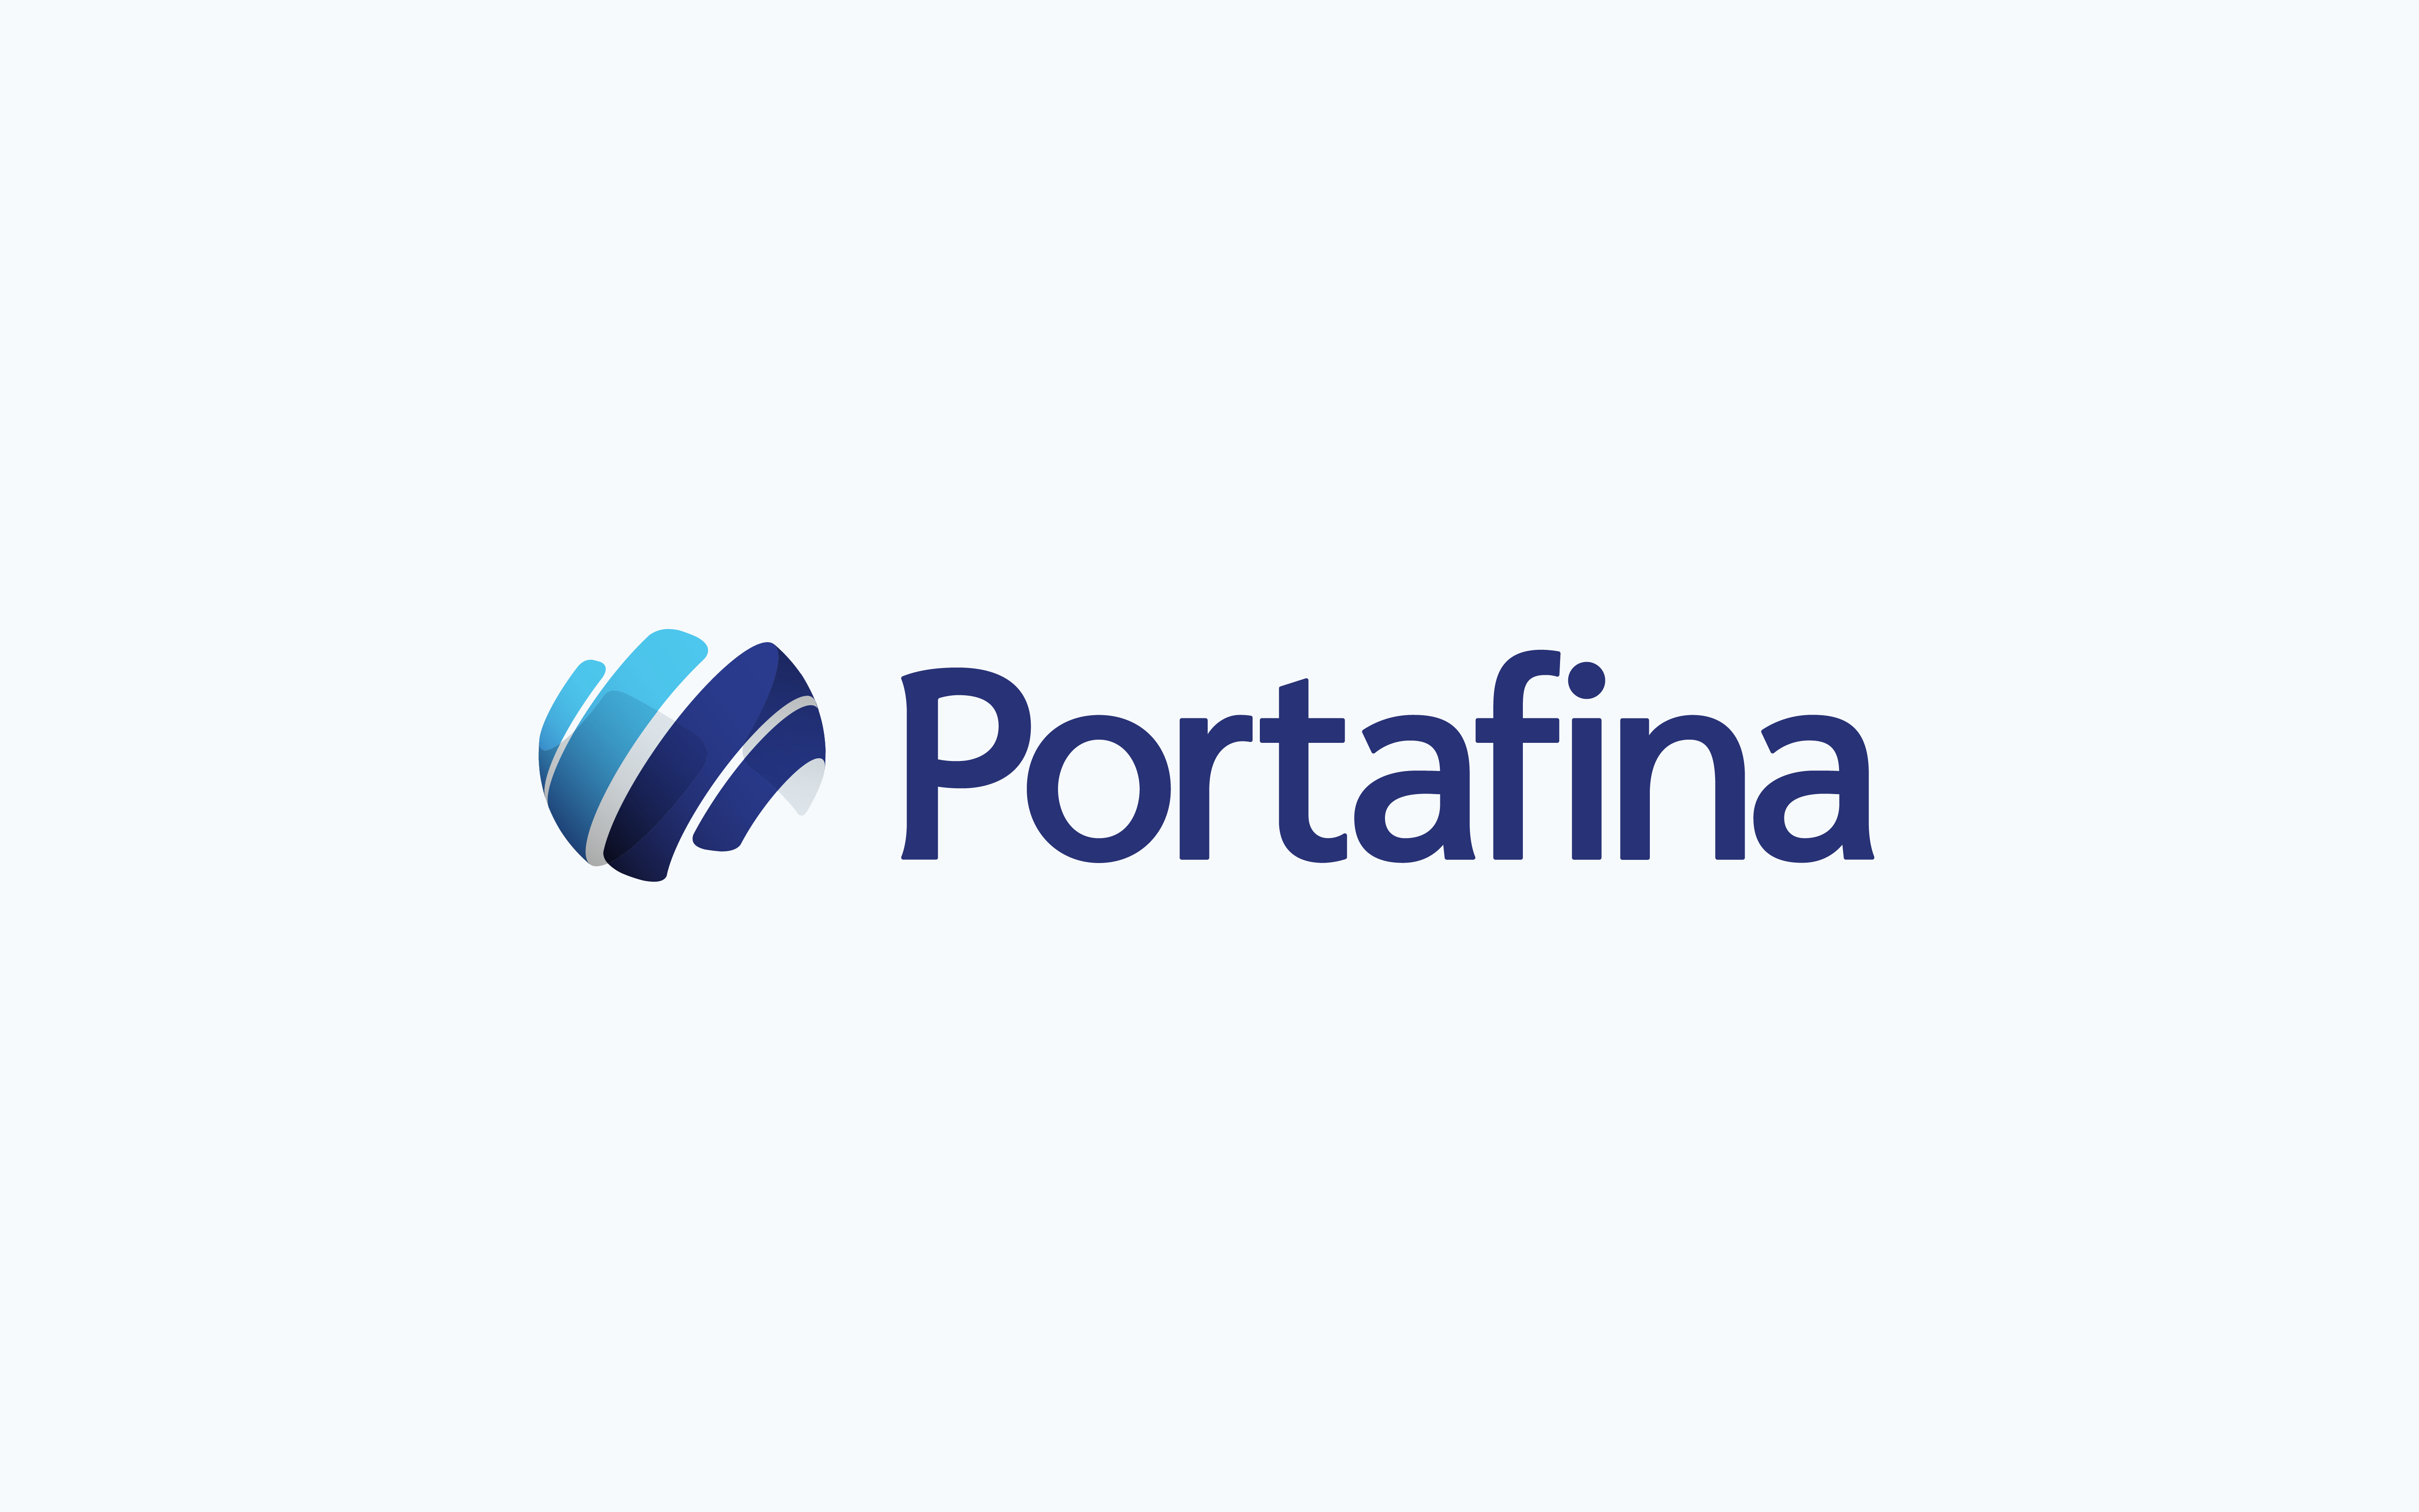 The Portafina brand features a structurally interesting symbol combined with clean, custom typography.